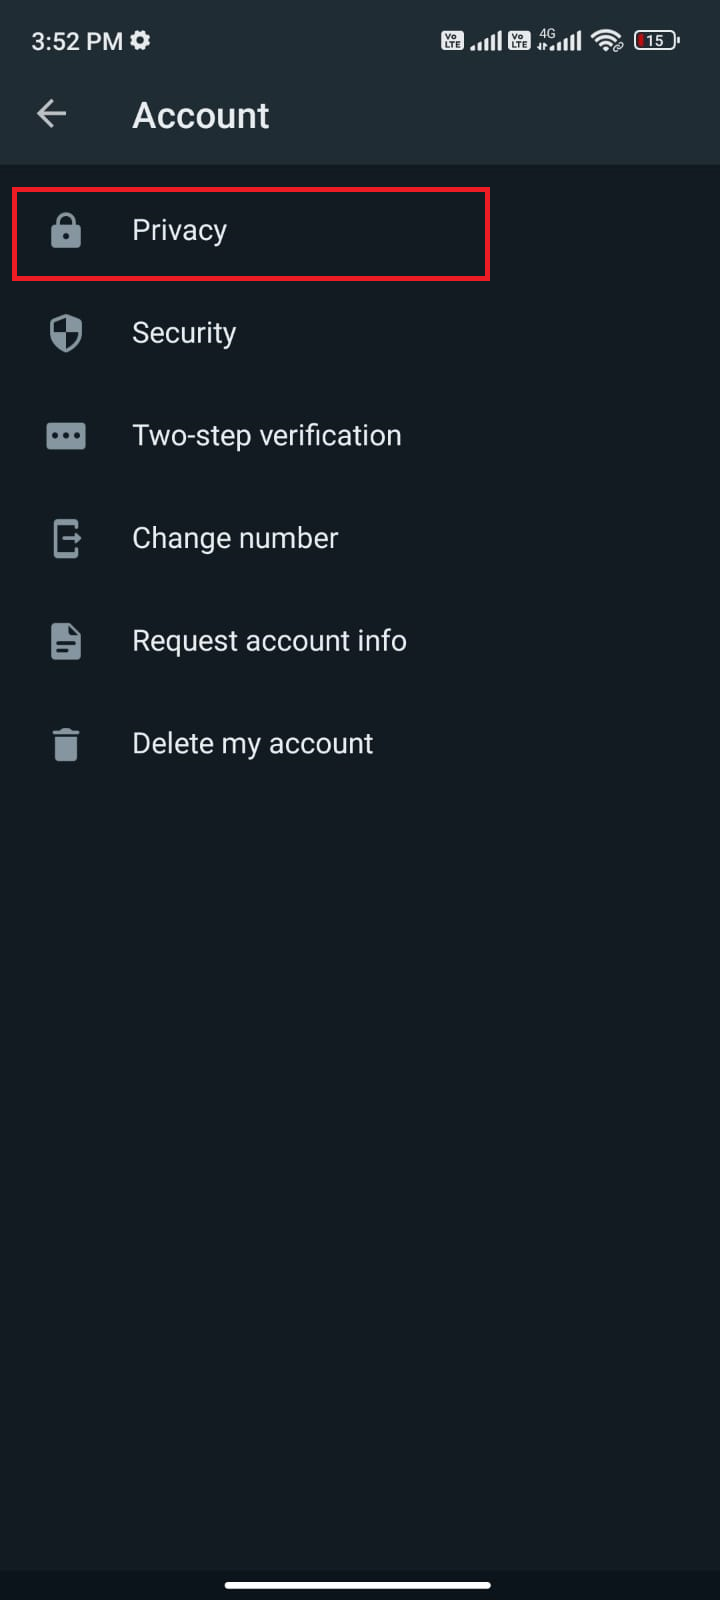 tap Account and then Privacy